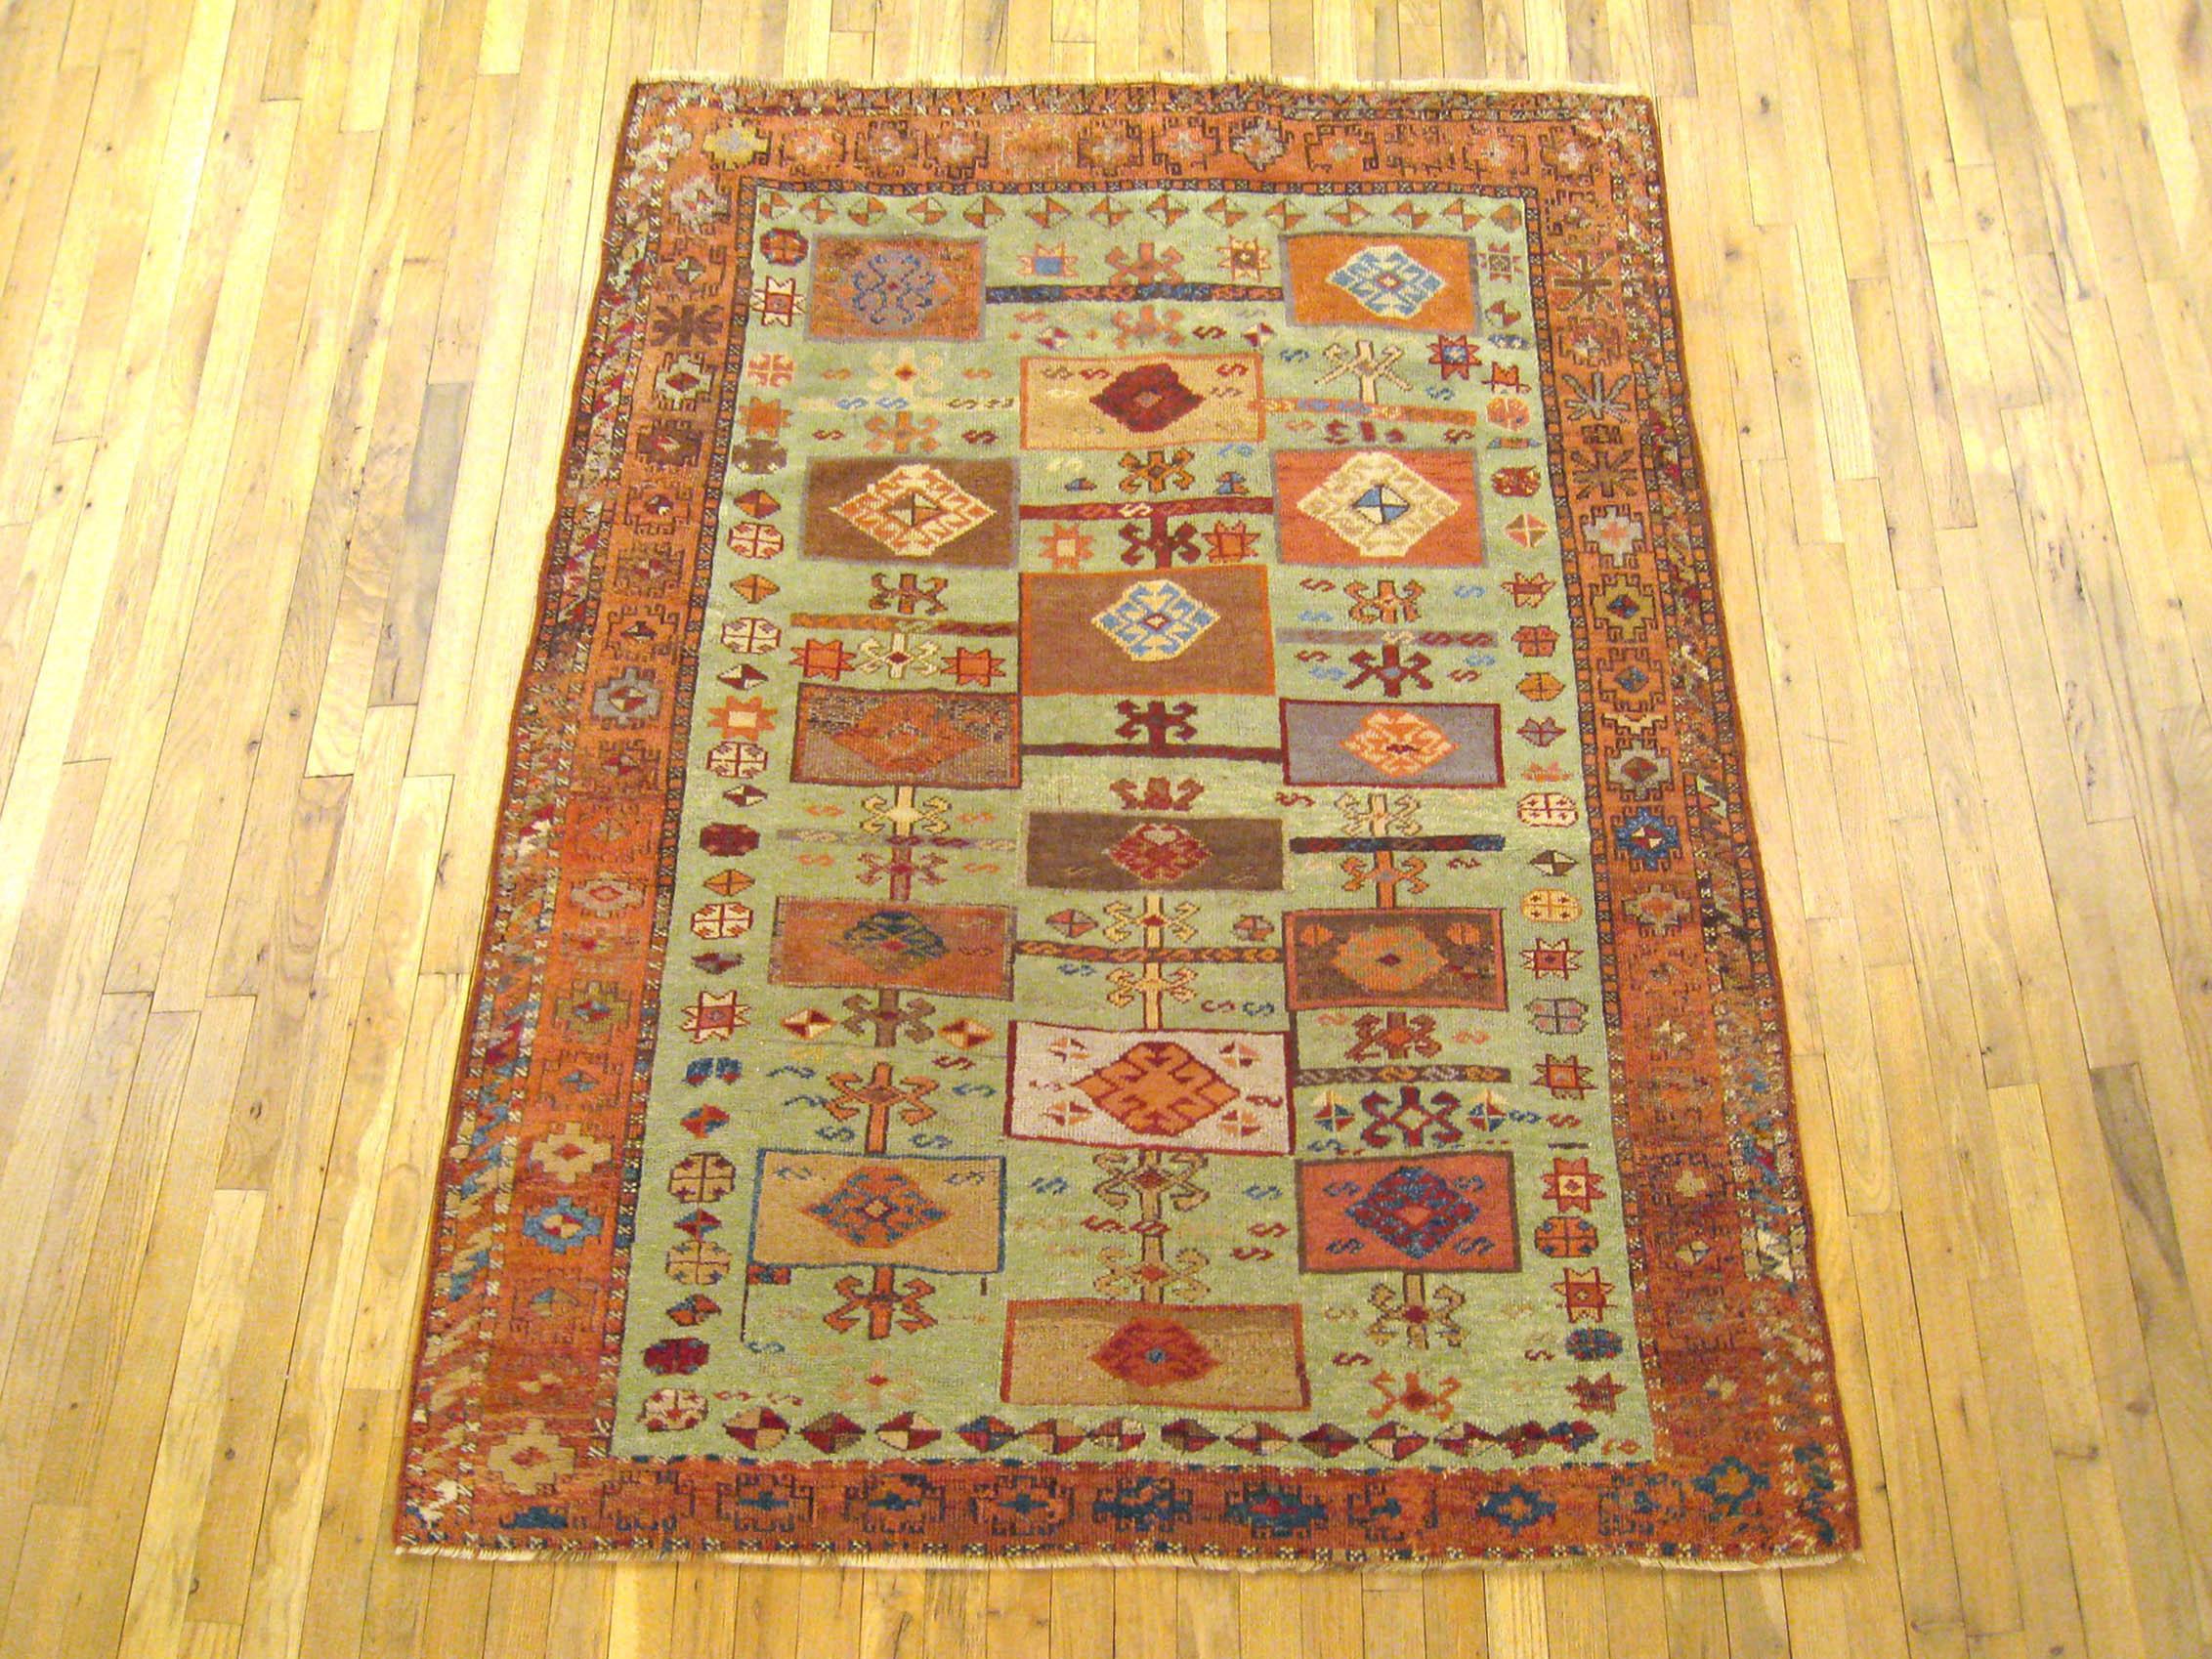 Antique Turkish Yuruk Decorative Oriental Carpet, Small size, with green Field

A gorgeous antique Turkish Yuruk carpet, circa 1900, size 5'4” x 4'7”. This lovely carpet features boxes motifs allover the green central field. The soft red border